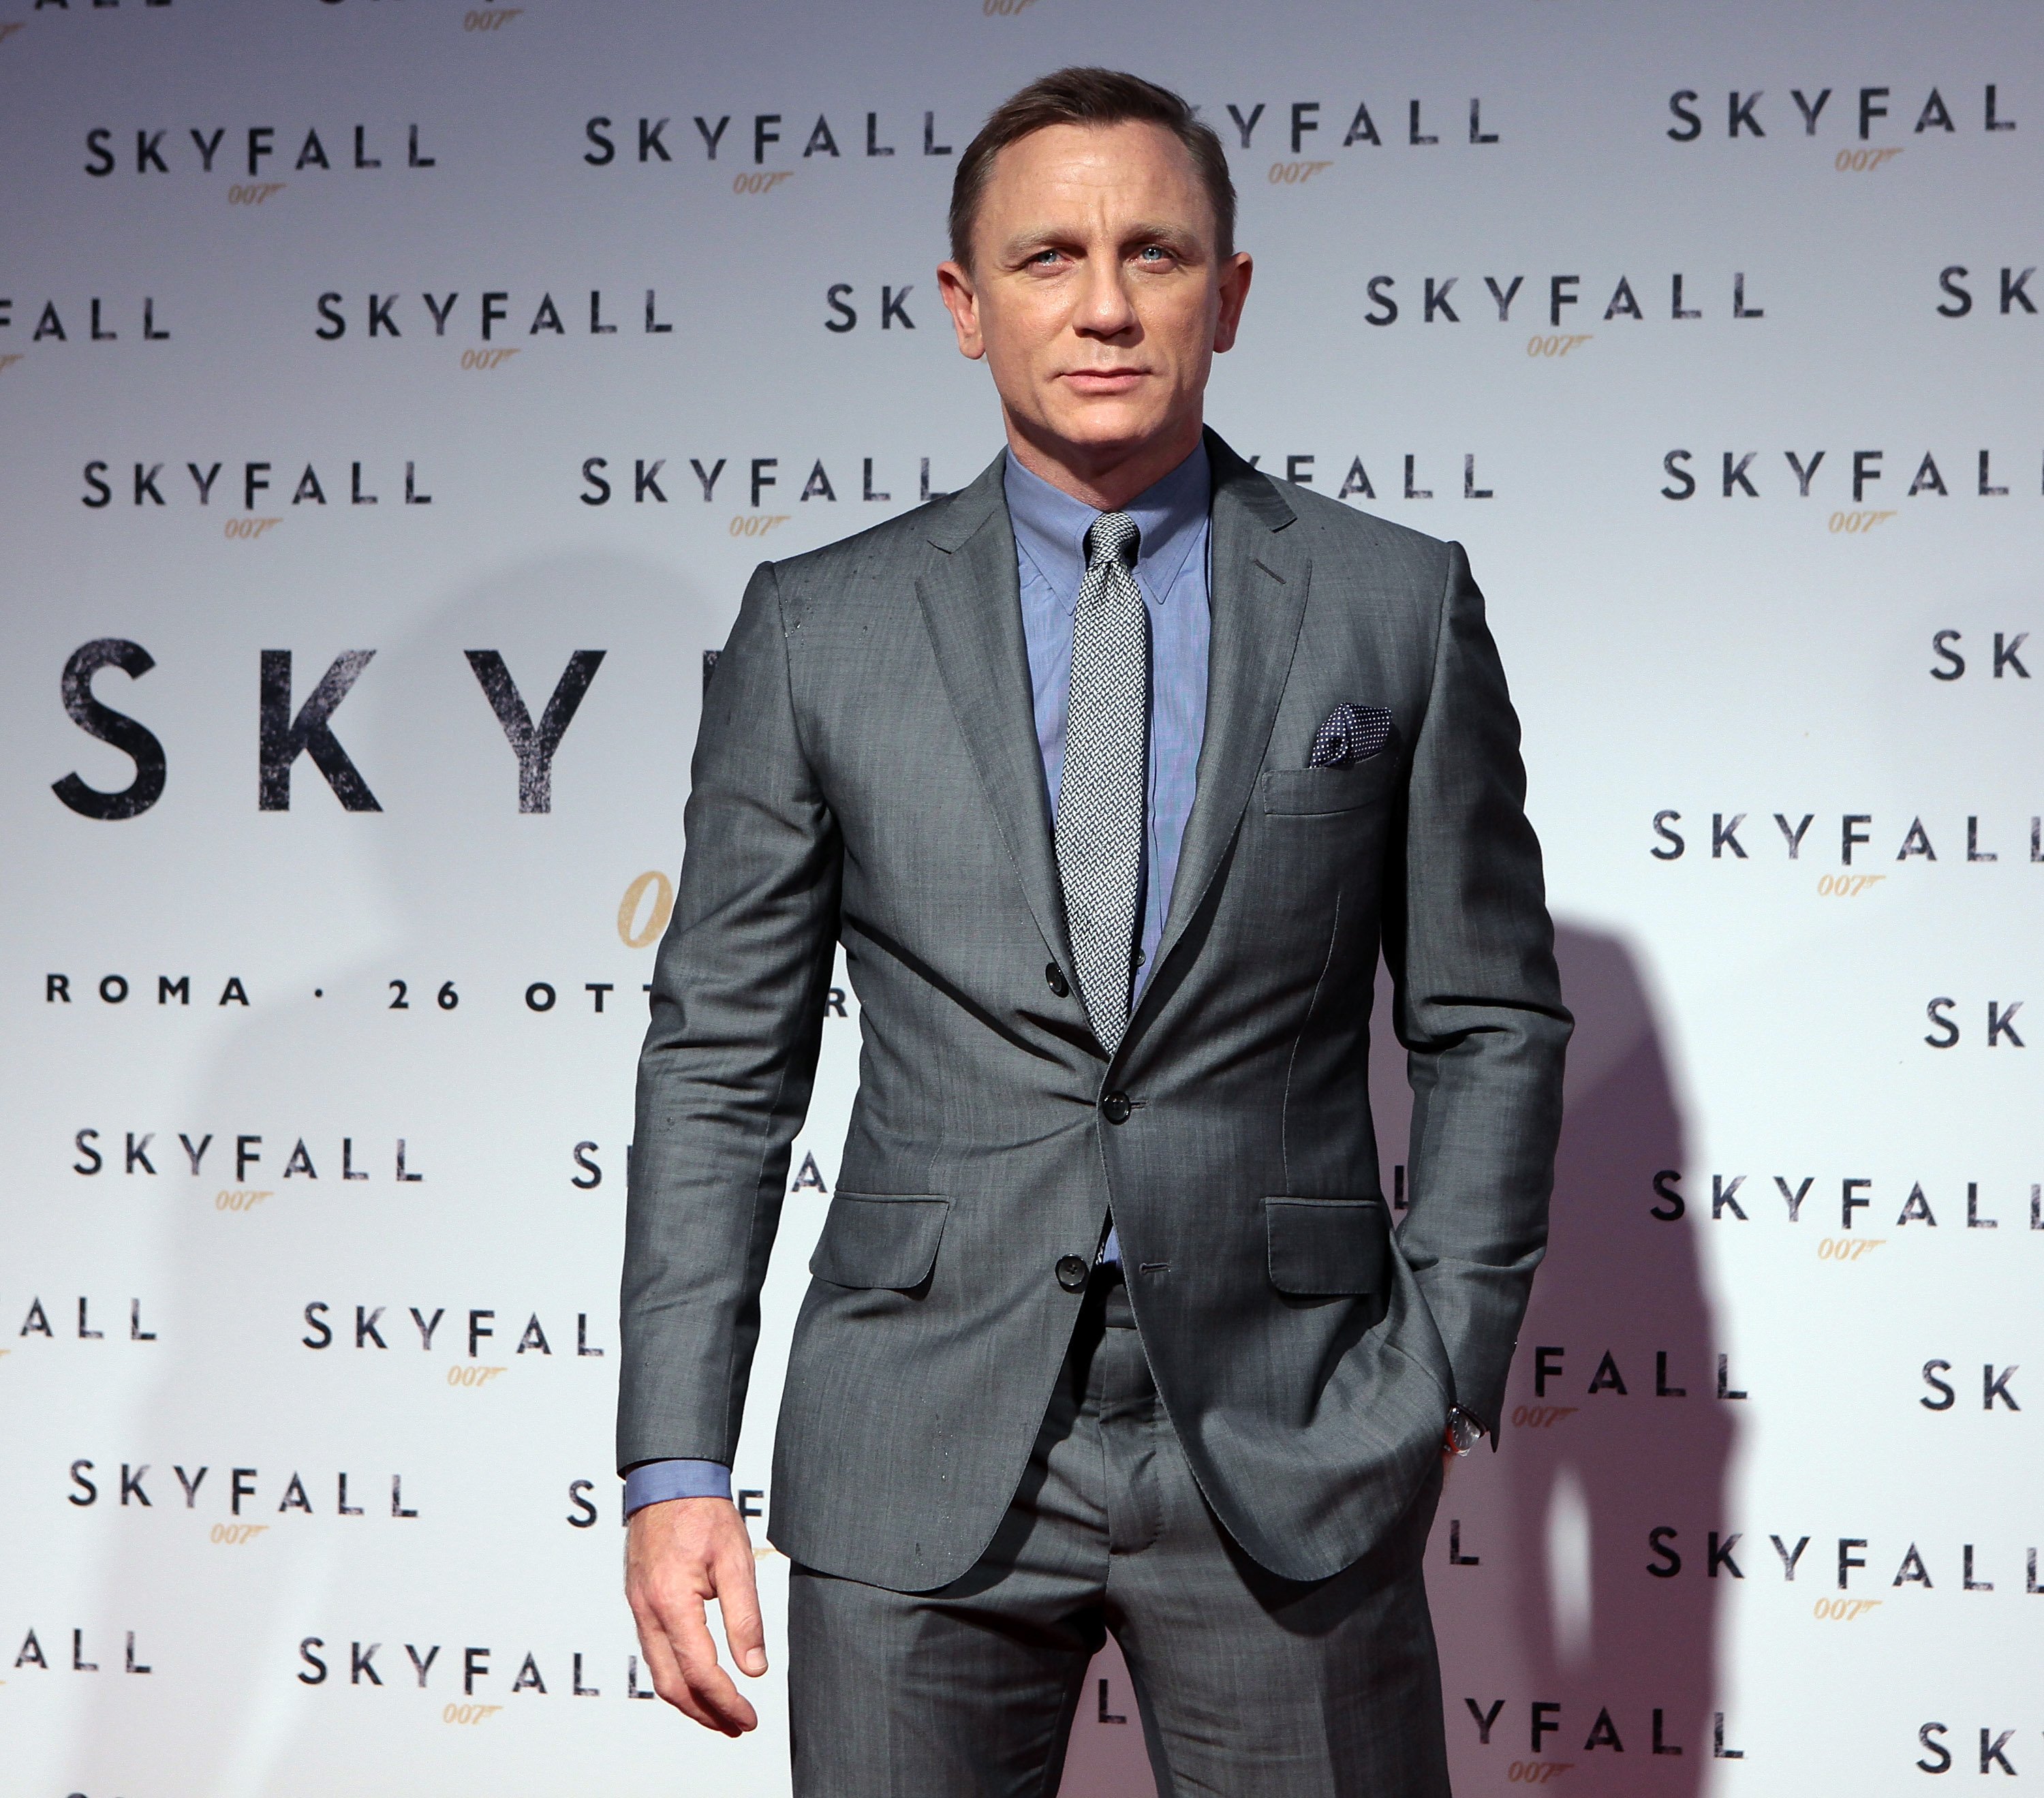 Daniel Craig attends "Skyfall" Rome Premiere at Warner Cinema Moderno on October 26, 2012, in Rome, Italy. | Source: Getty Images.